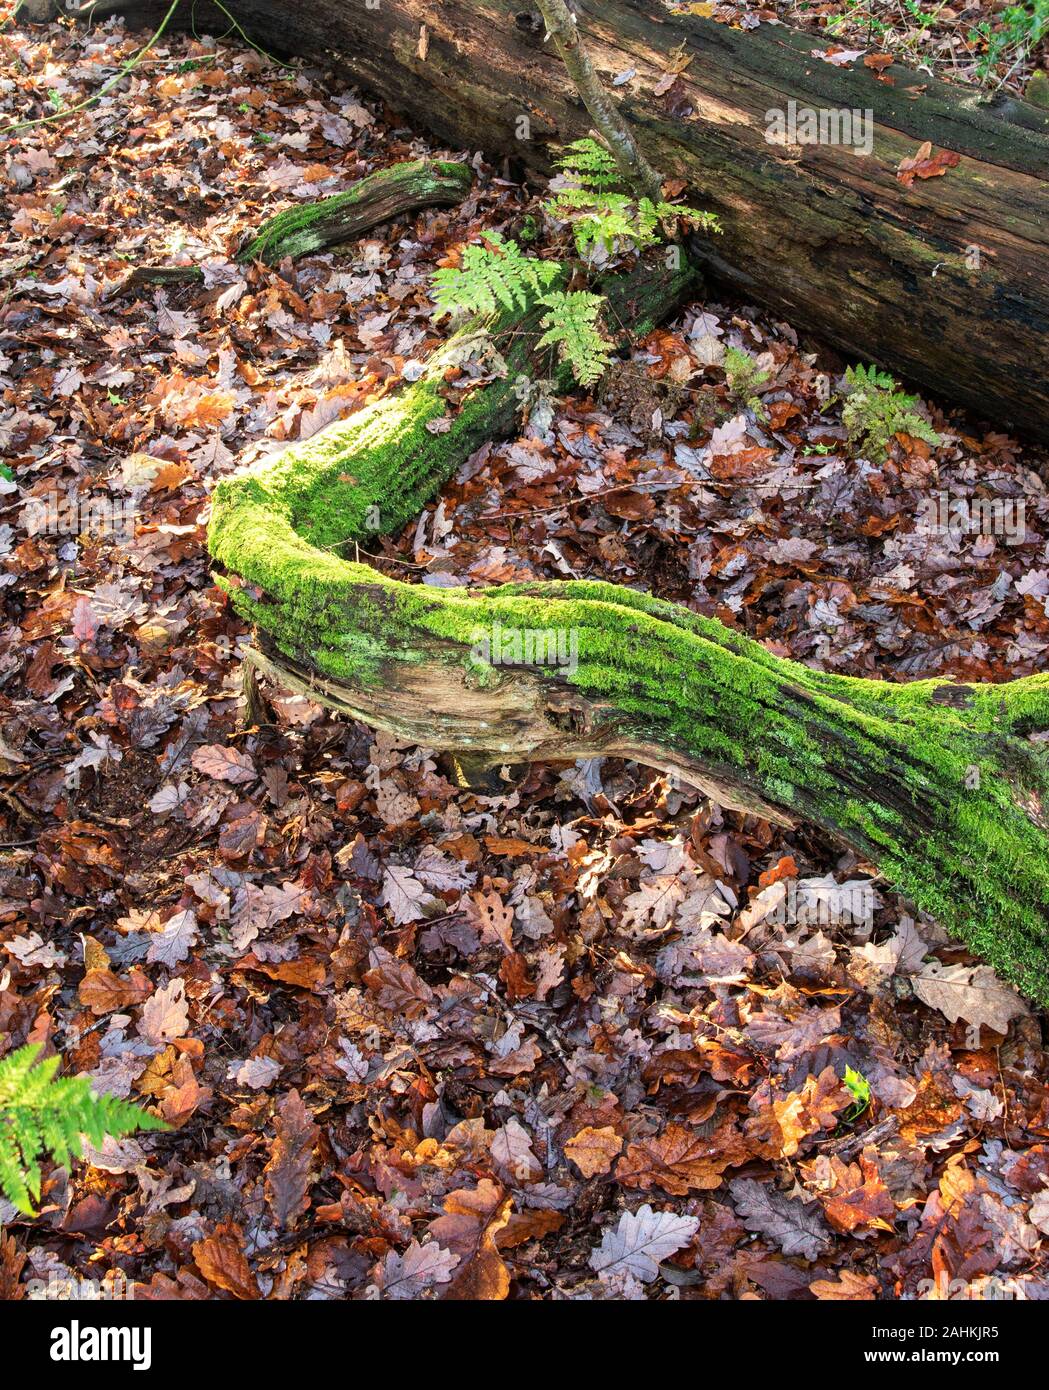 Natural recycling with moss covered branch on a leaf covered woodland floor and new growing fern, London, England, United Kingdom, Europe Stock Photo